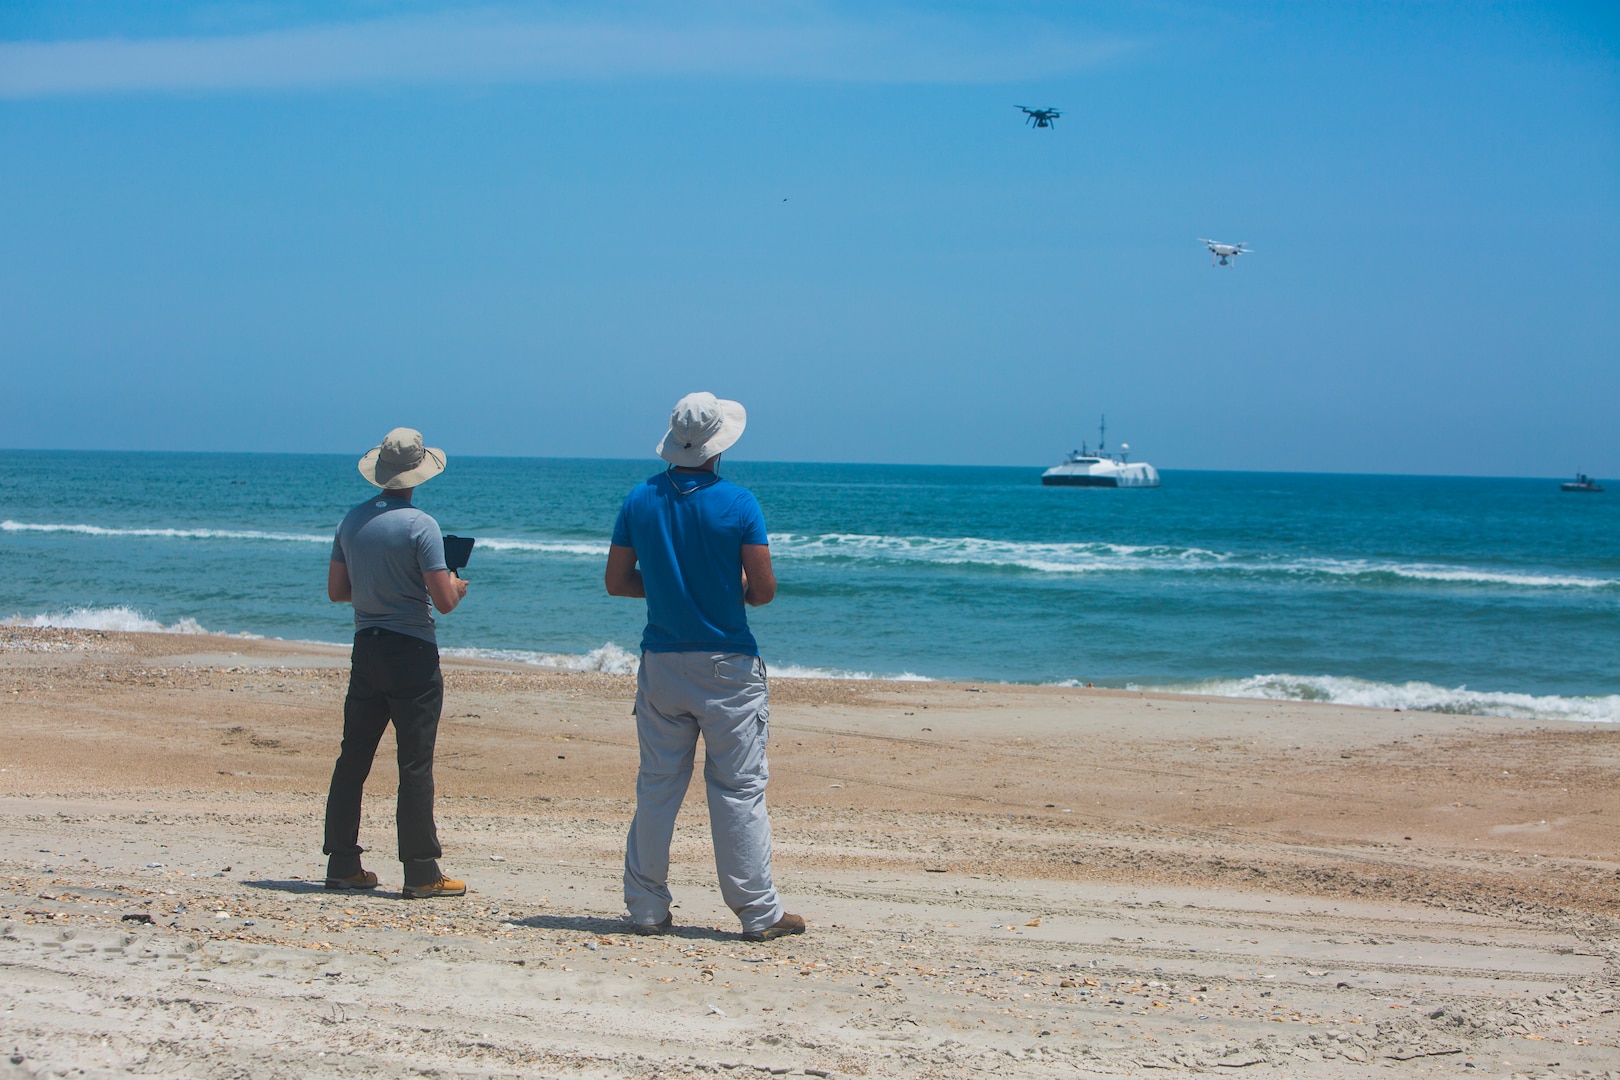 Jared Soltis (left) and Owen McGarity, engineers in the Sea-Based Aviation and Aeronautics Branch (Code 882) at Naval Surface Warfare Center, Carderock Division, pilot unmanned aerial systems (UAS) on July 15, 2019, at the beach on Camp Lejeune, North Carolina, during the Advanced Naval Technology Exercise (ANTX) East. As part of the Red Team, McGarity and Soltis acted as the adversary for counter-UAS technologies that were being demonstrated. (U.S. Marine Corps photo by Cpl. Michael Parks/Released)